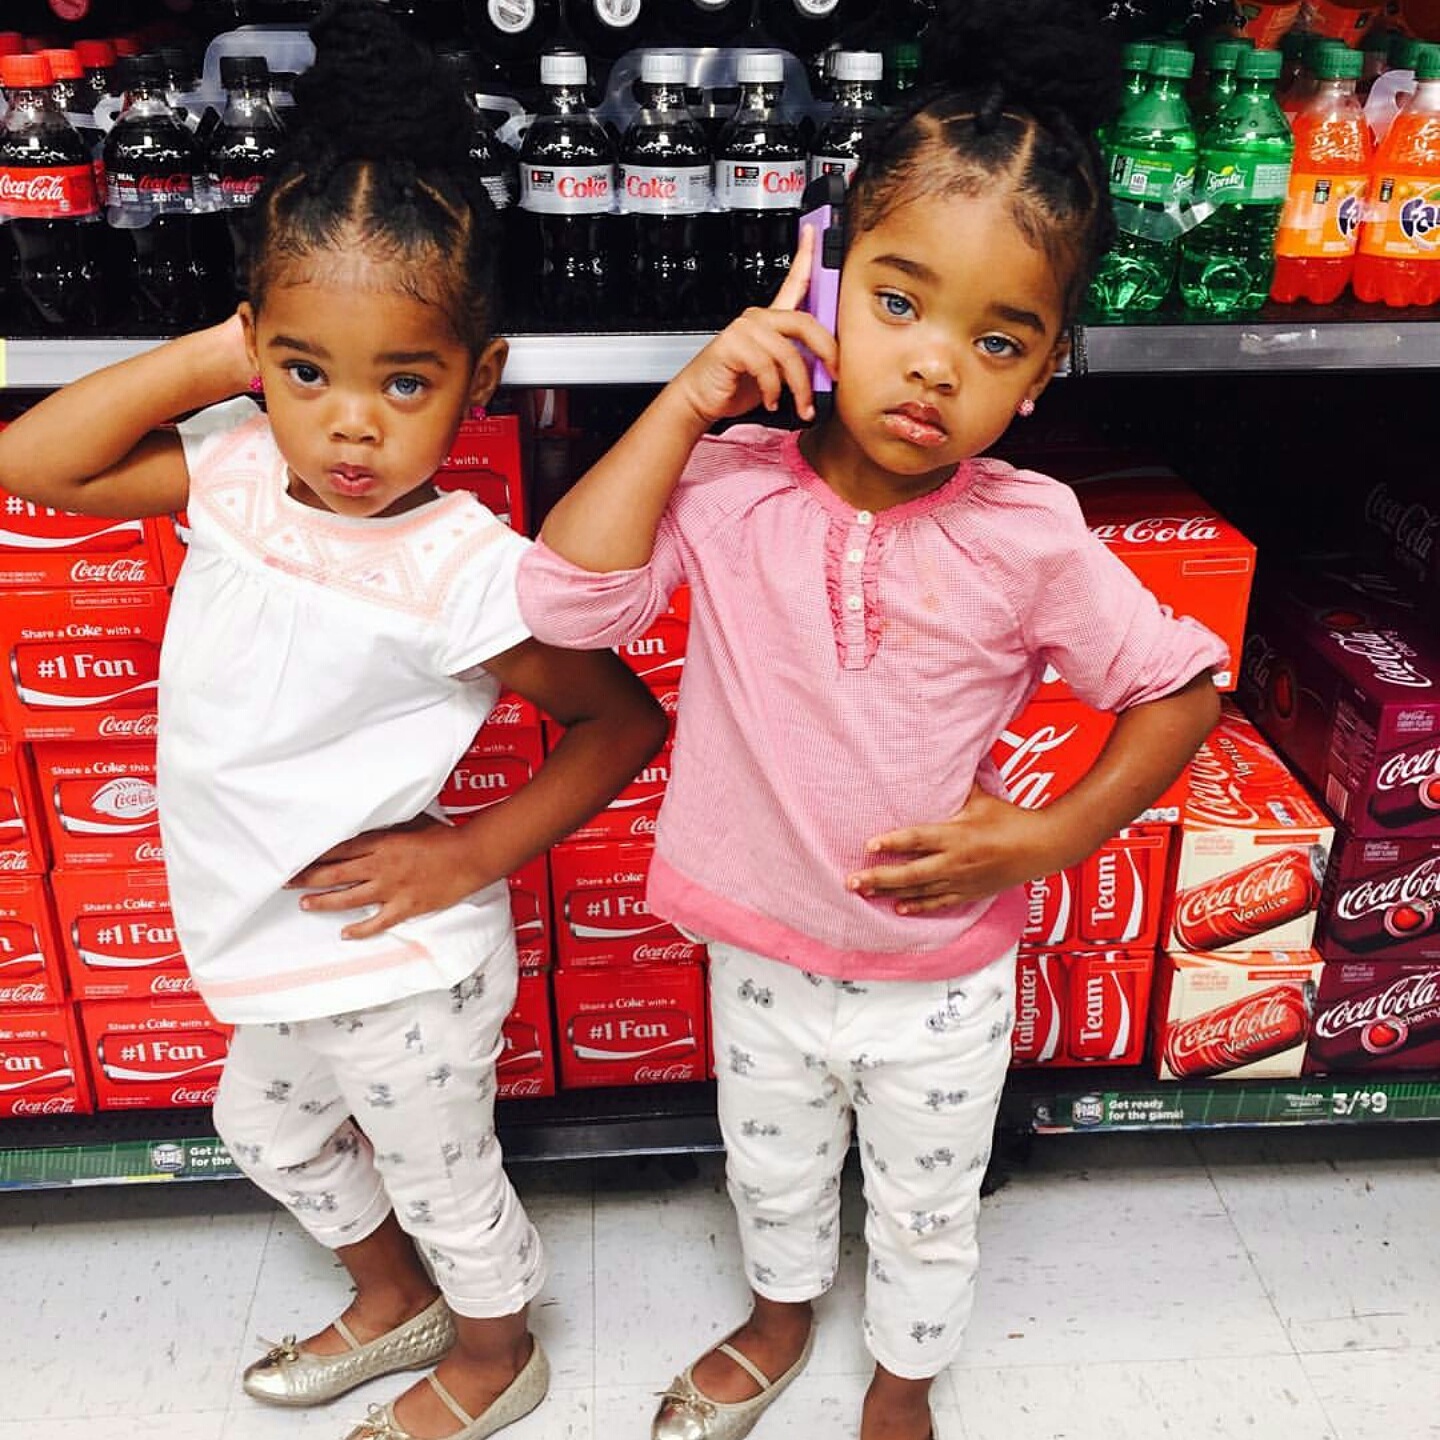 Behind blue eyes: the Instagram twins who went viral | Monagiza